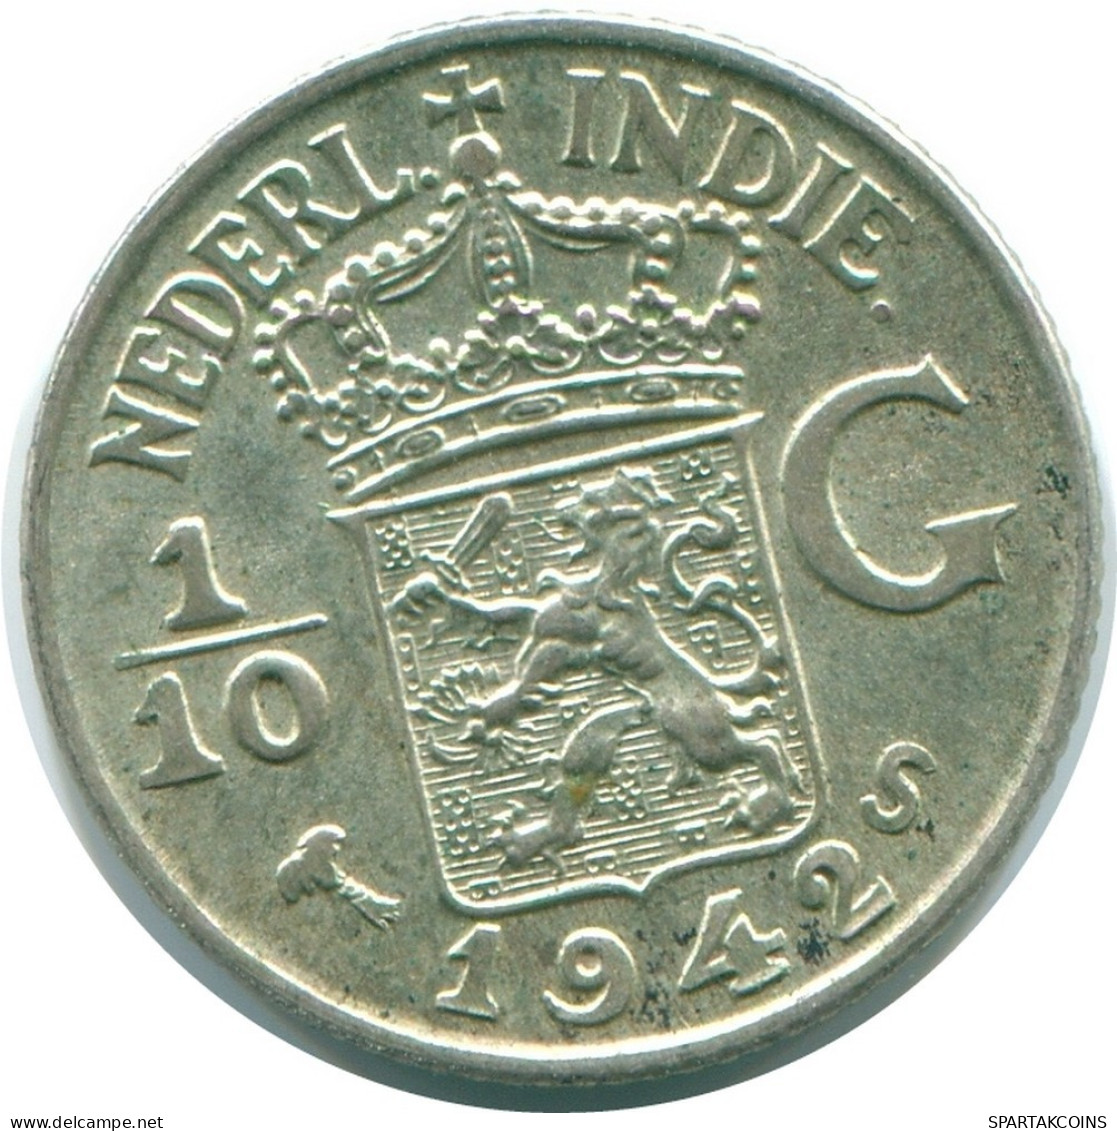 1/10 GULDEN 1942 NETHERLANDS EAST INDIES SILVER Colonial Coin #NL13859.3.U.A - Dutch East Indies